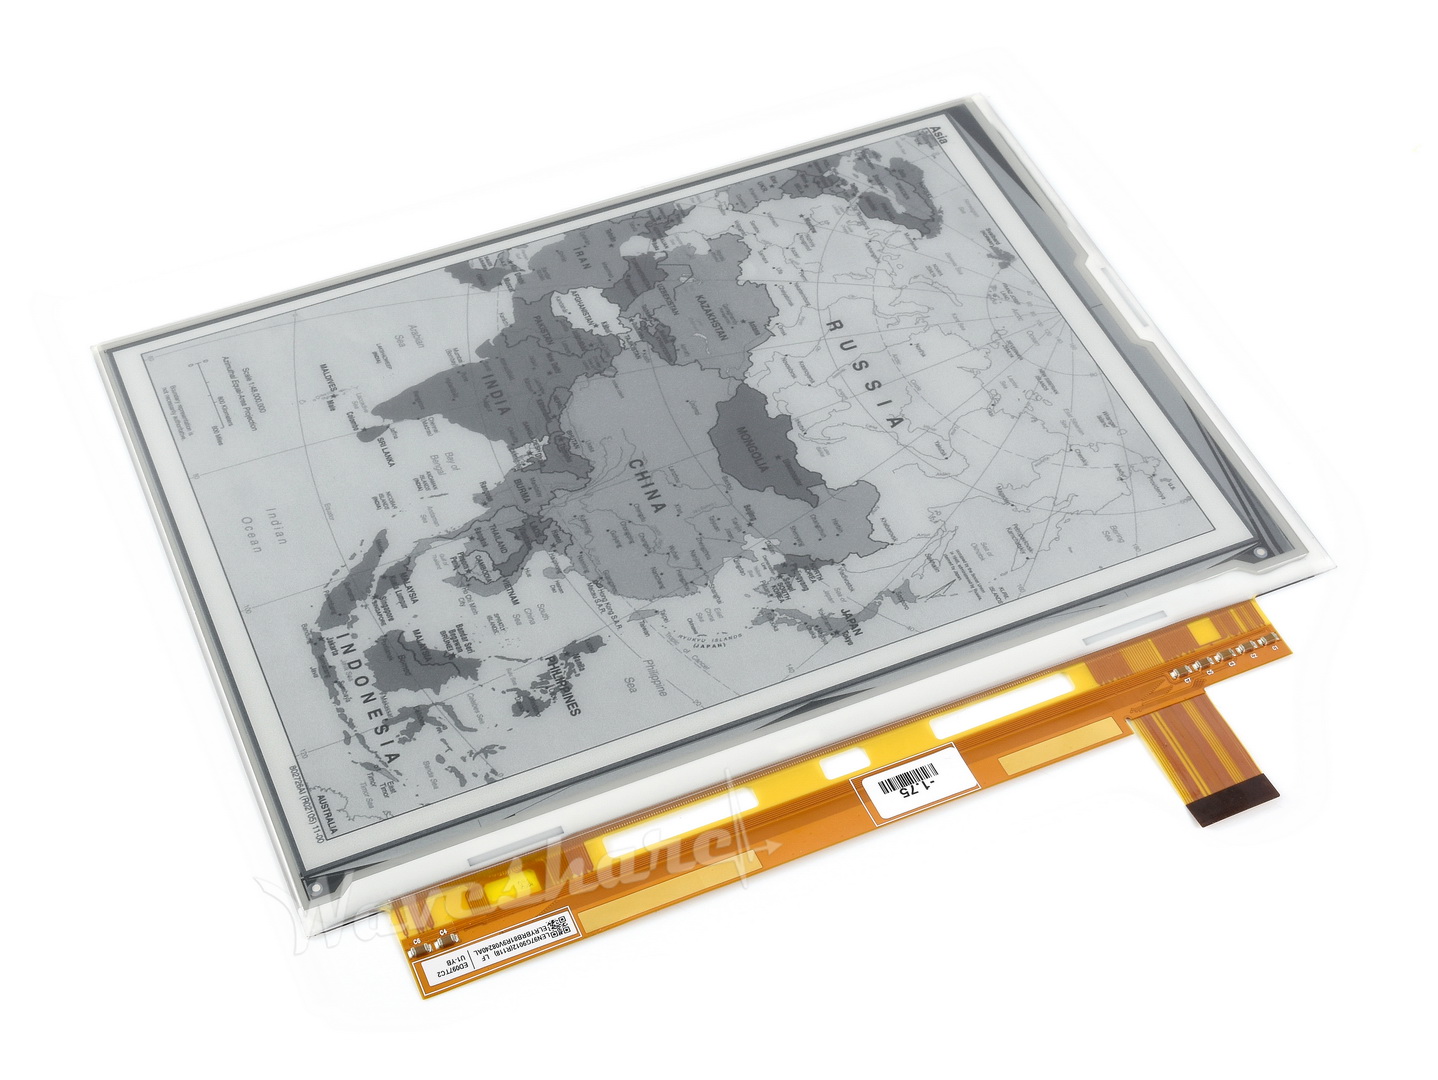 1200x825, 9.7inch E-Ink raw display, parallel port, without PCB